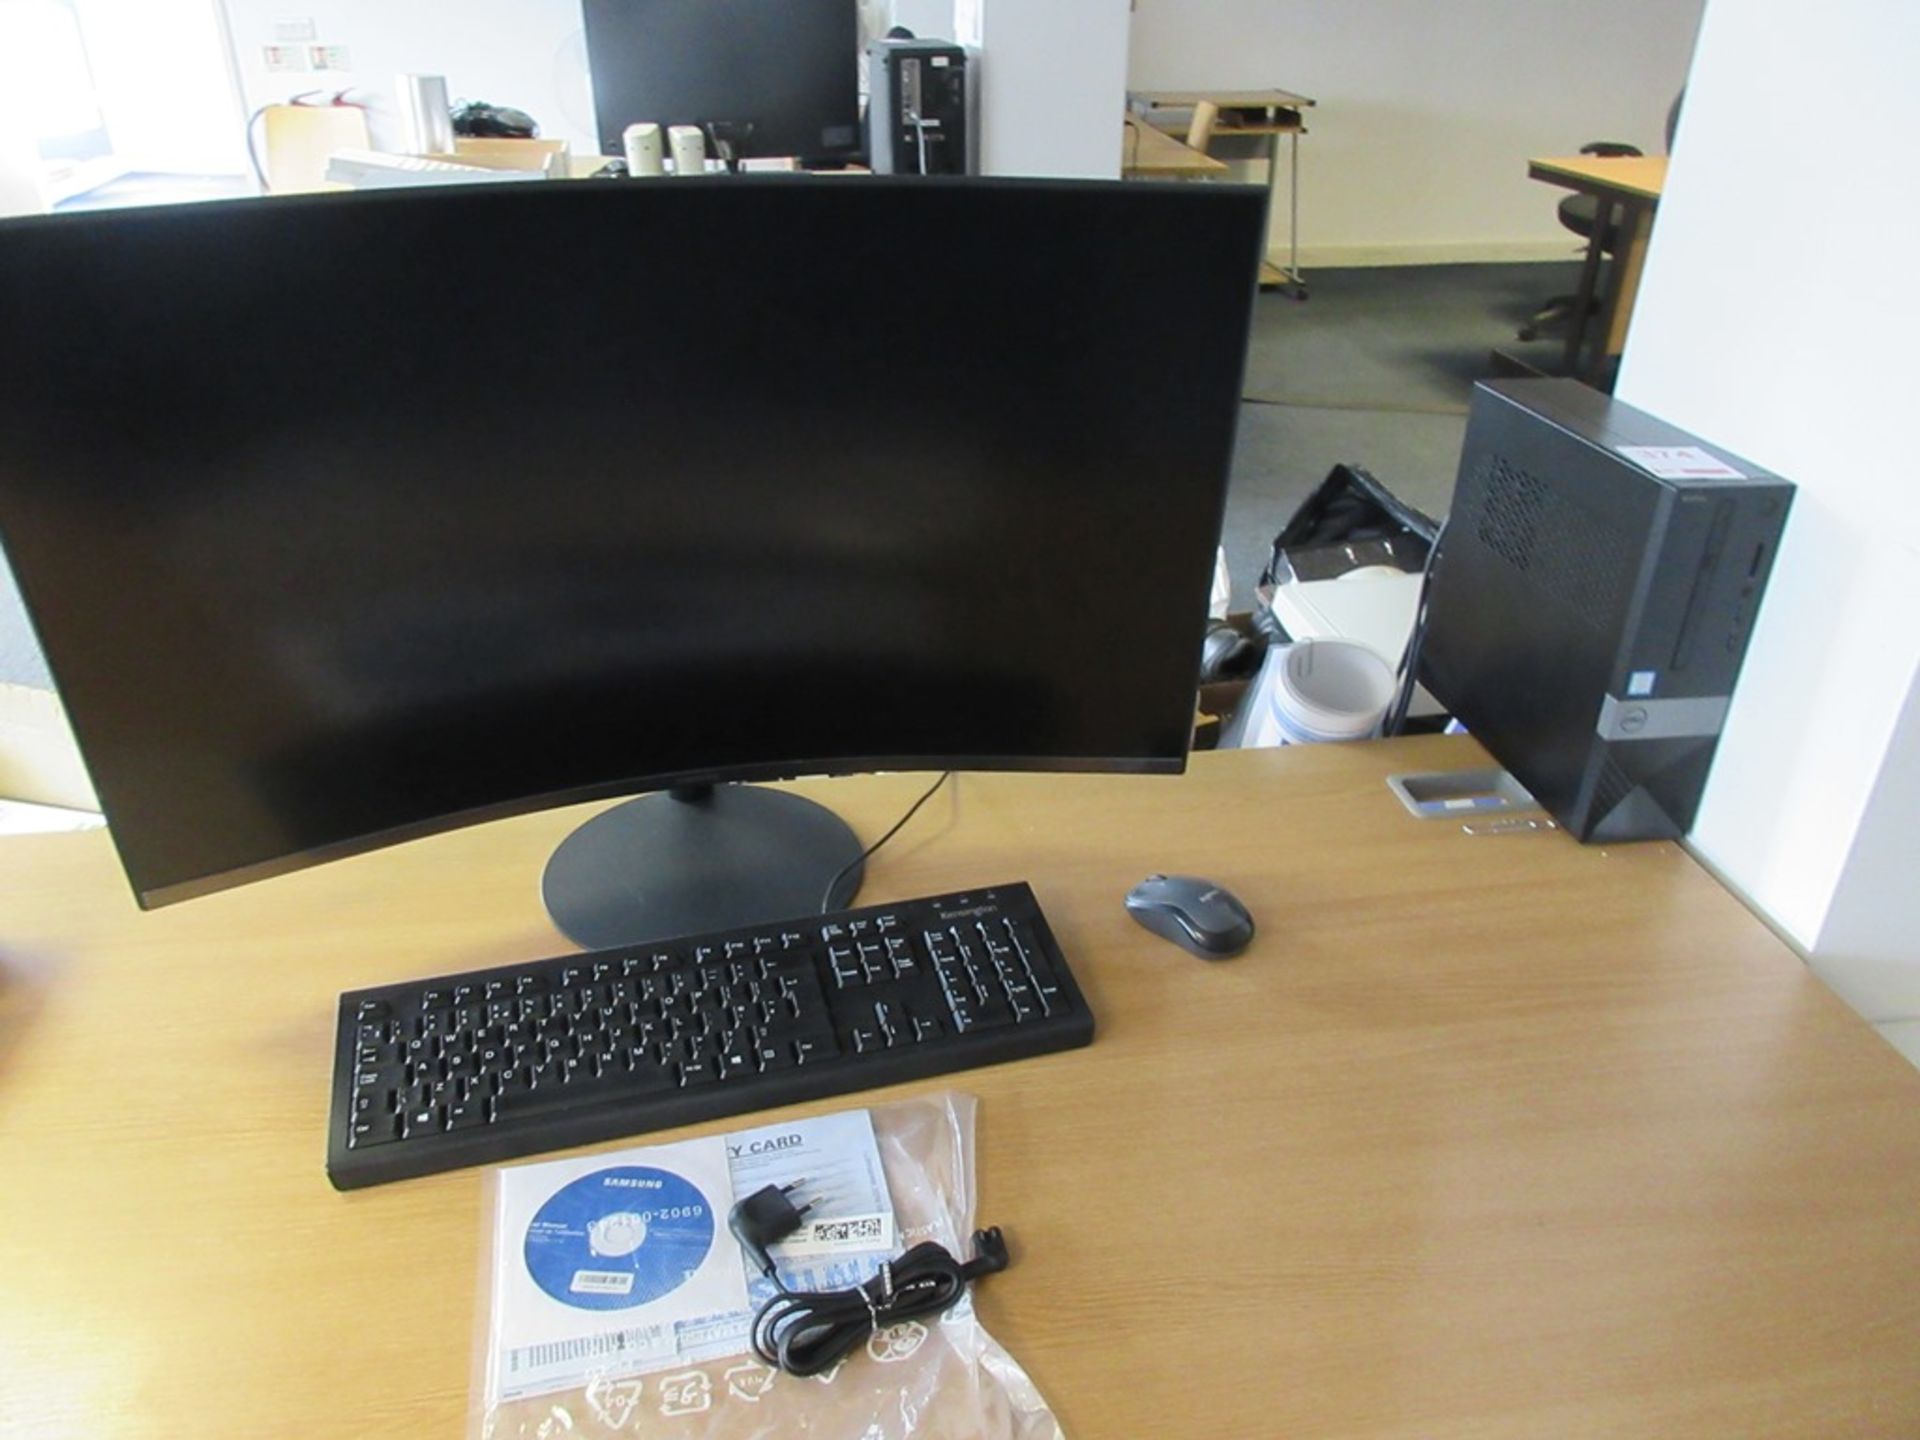 Dell Core i5 Computer system with Samsung curved screen, keyboard, mouse